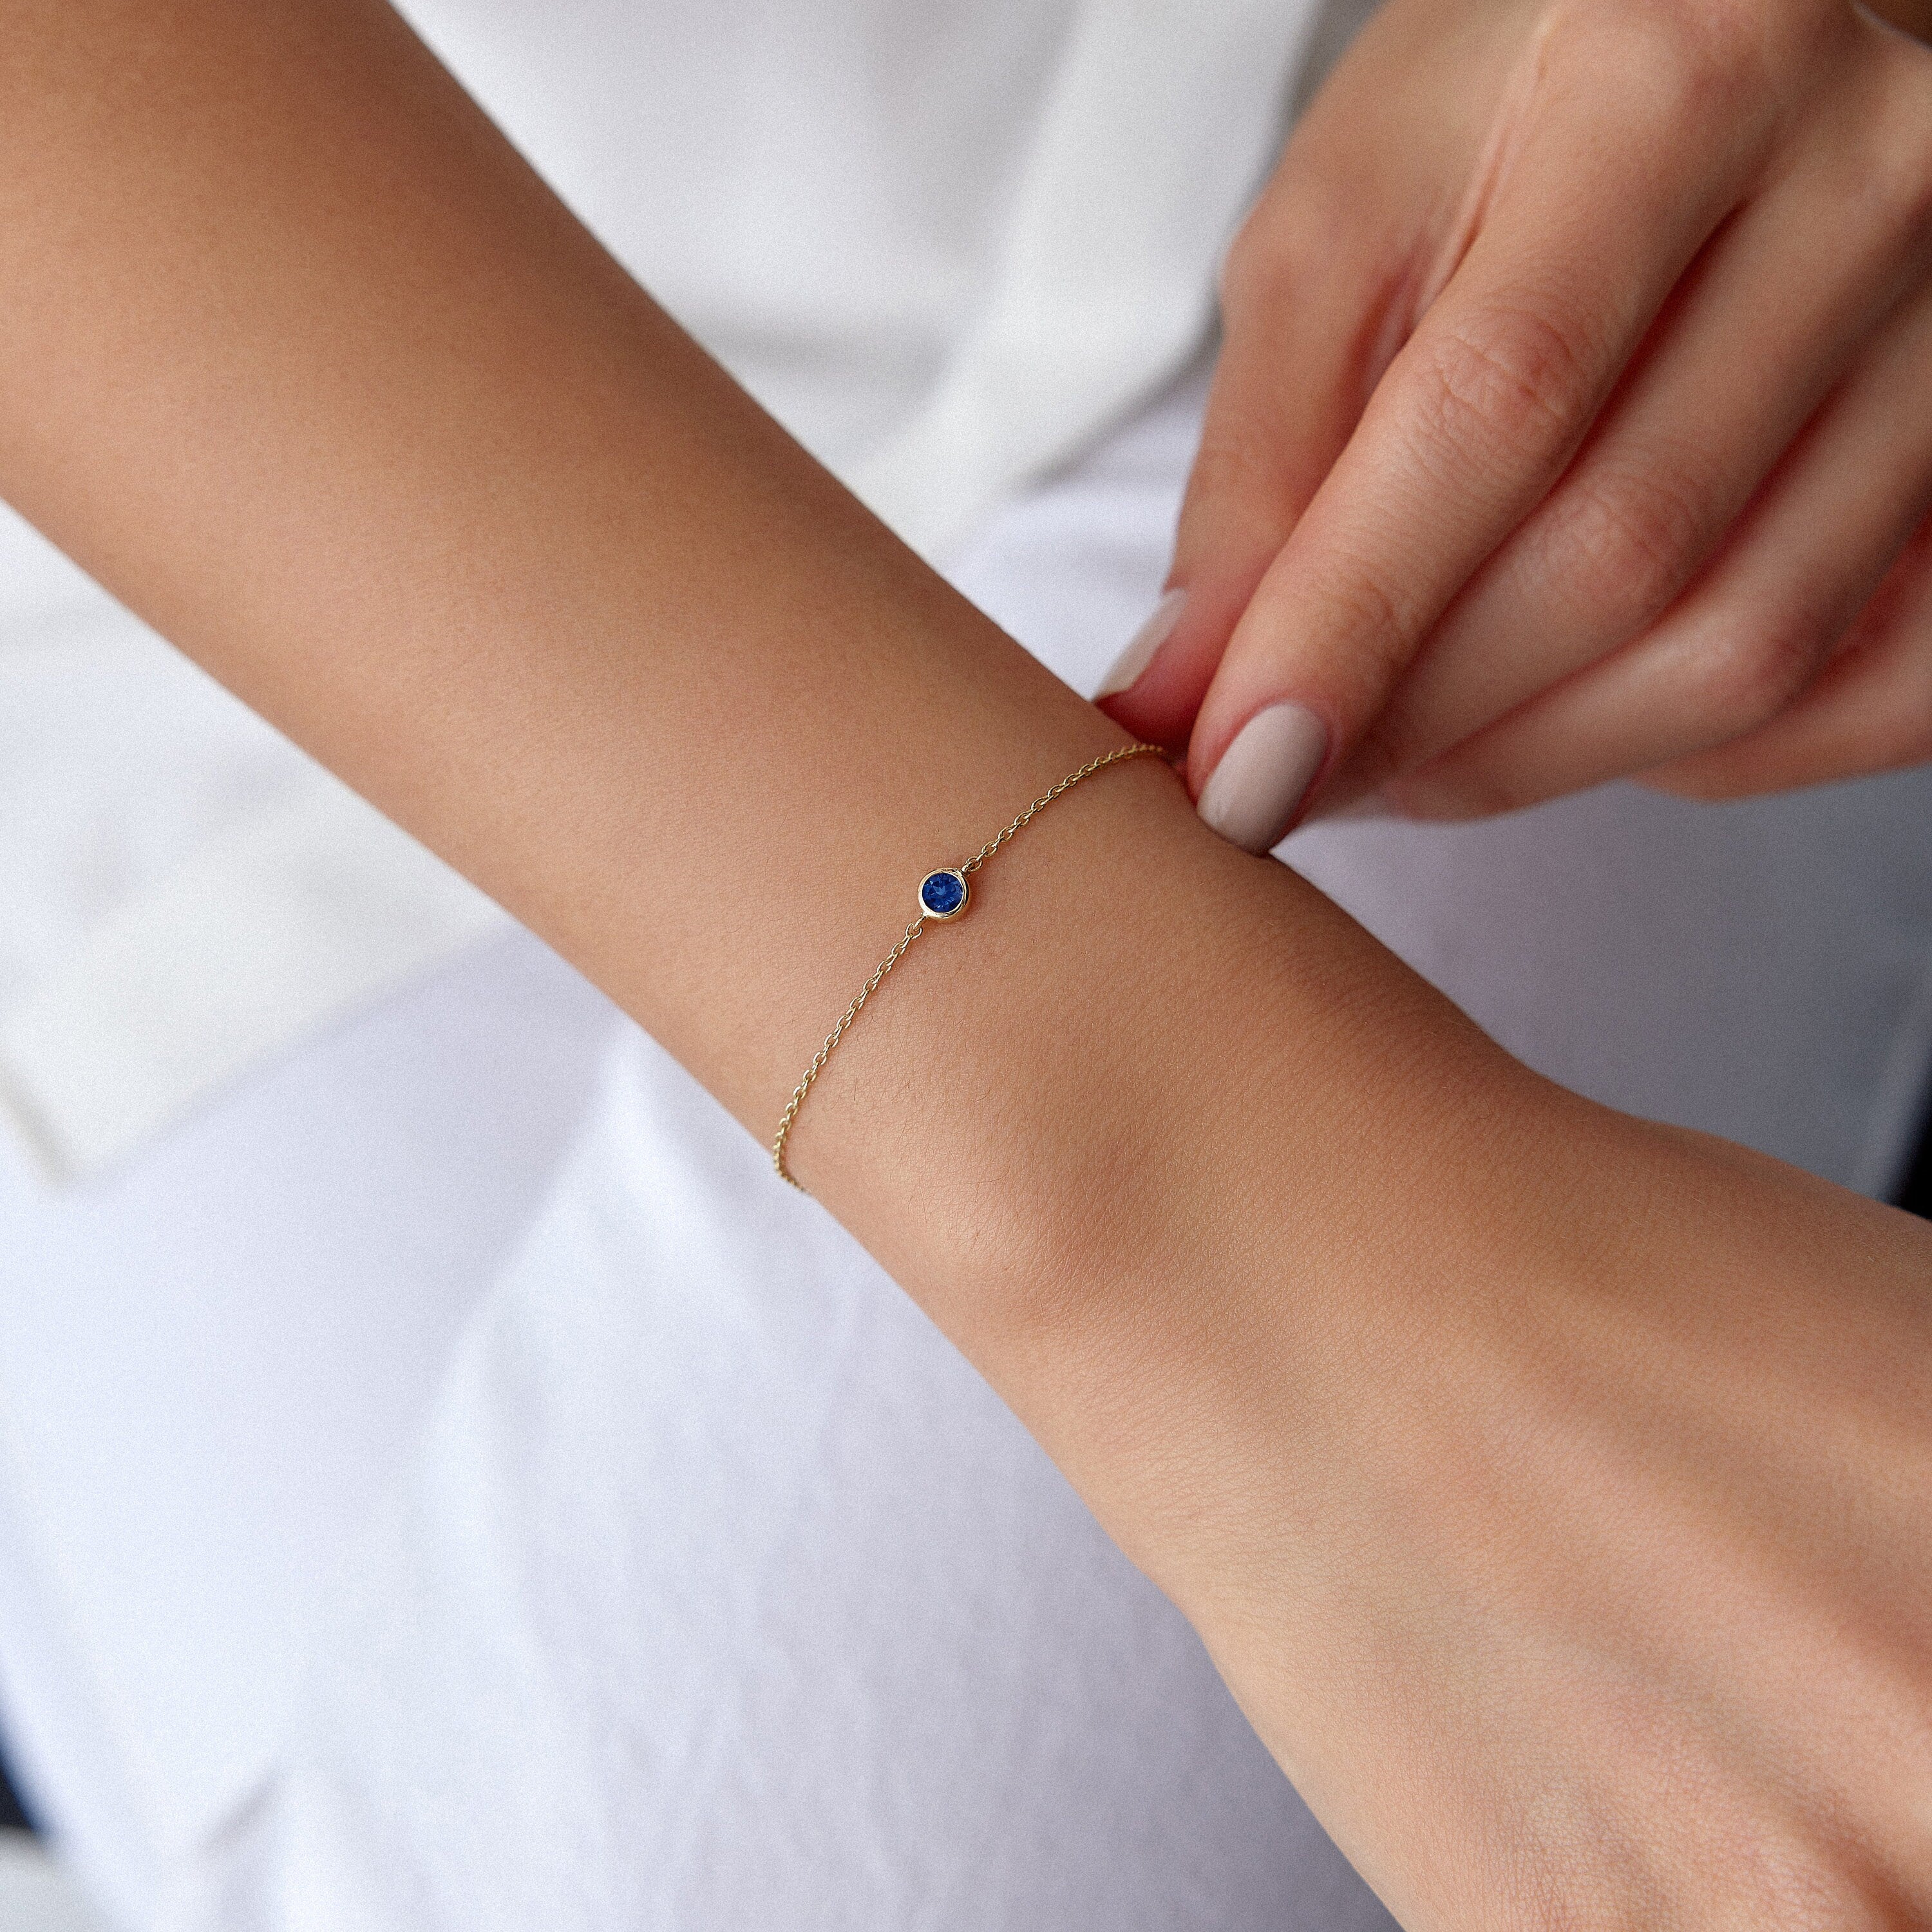 Blue Sapphire Bracelet Available in 14K and 18K Gold